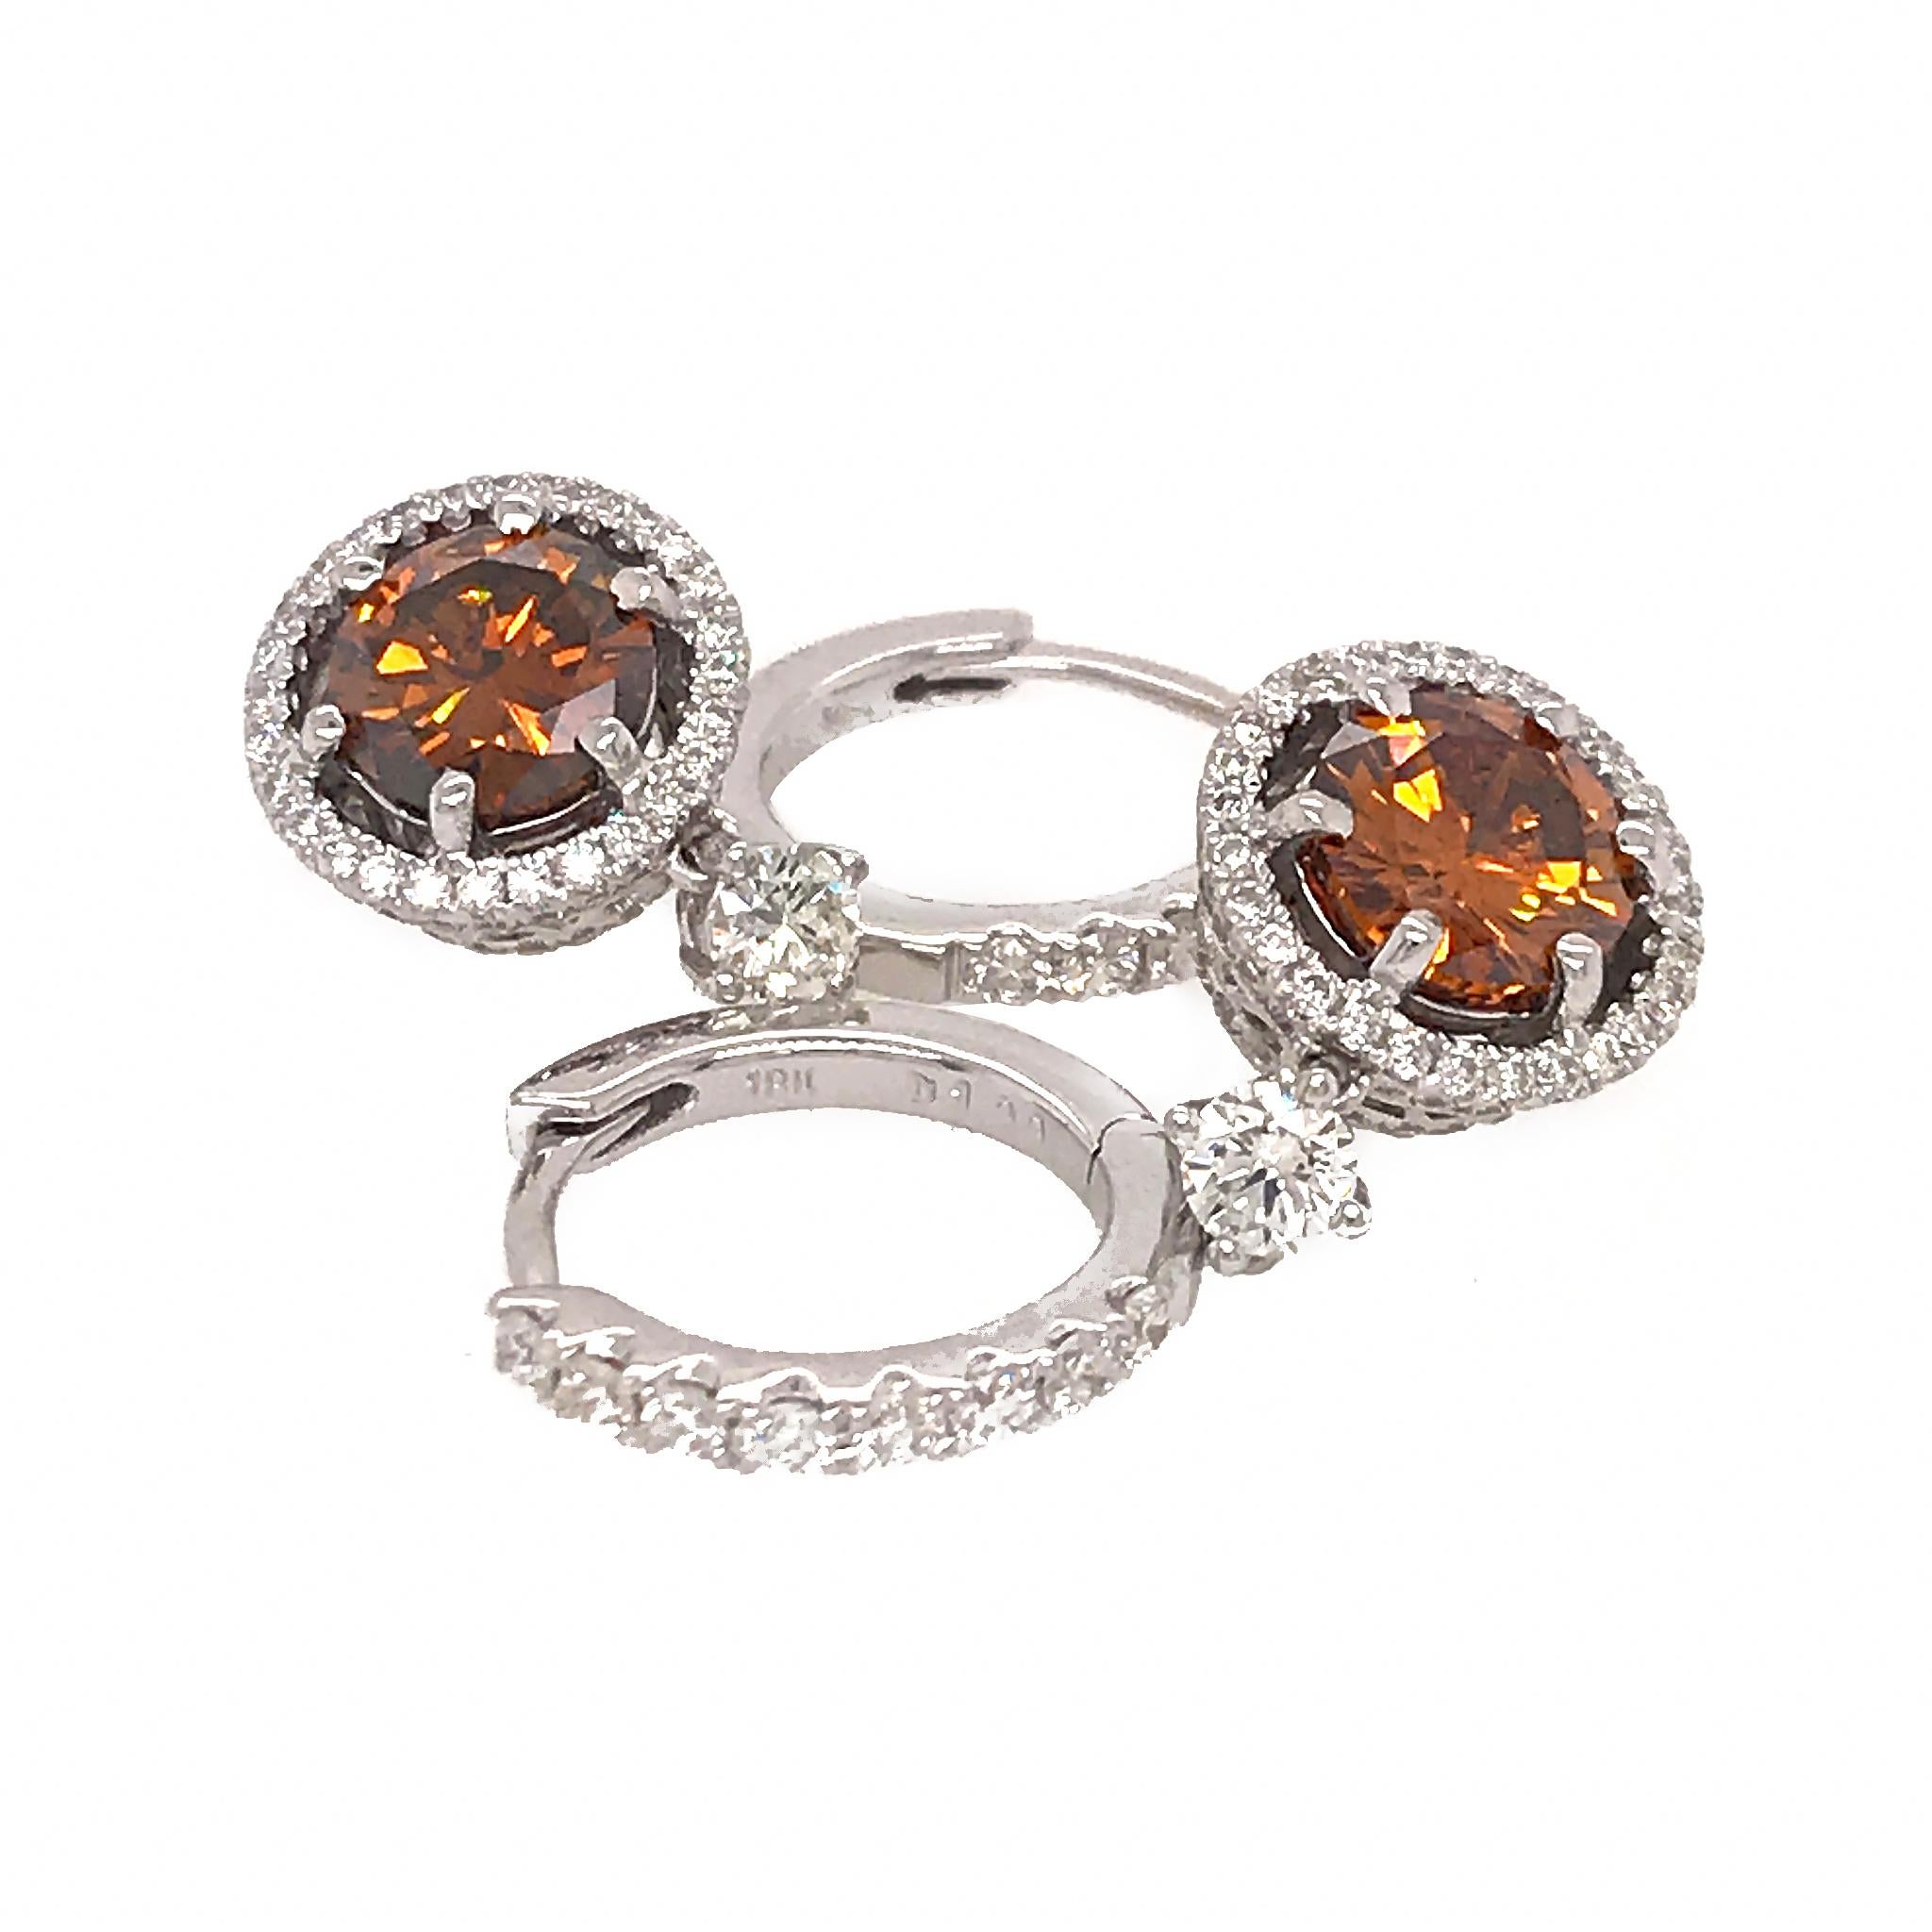 18k White Gold
GIA Report Number: 5202971977 and 2205972019
Round Brilliant Cognac Colored Diamond: 1.65 ct twd (Treated)
Diamond: 2.65 ct twd
Length: 1 inch